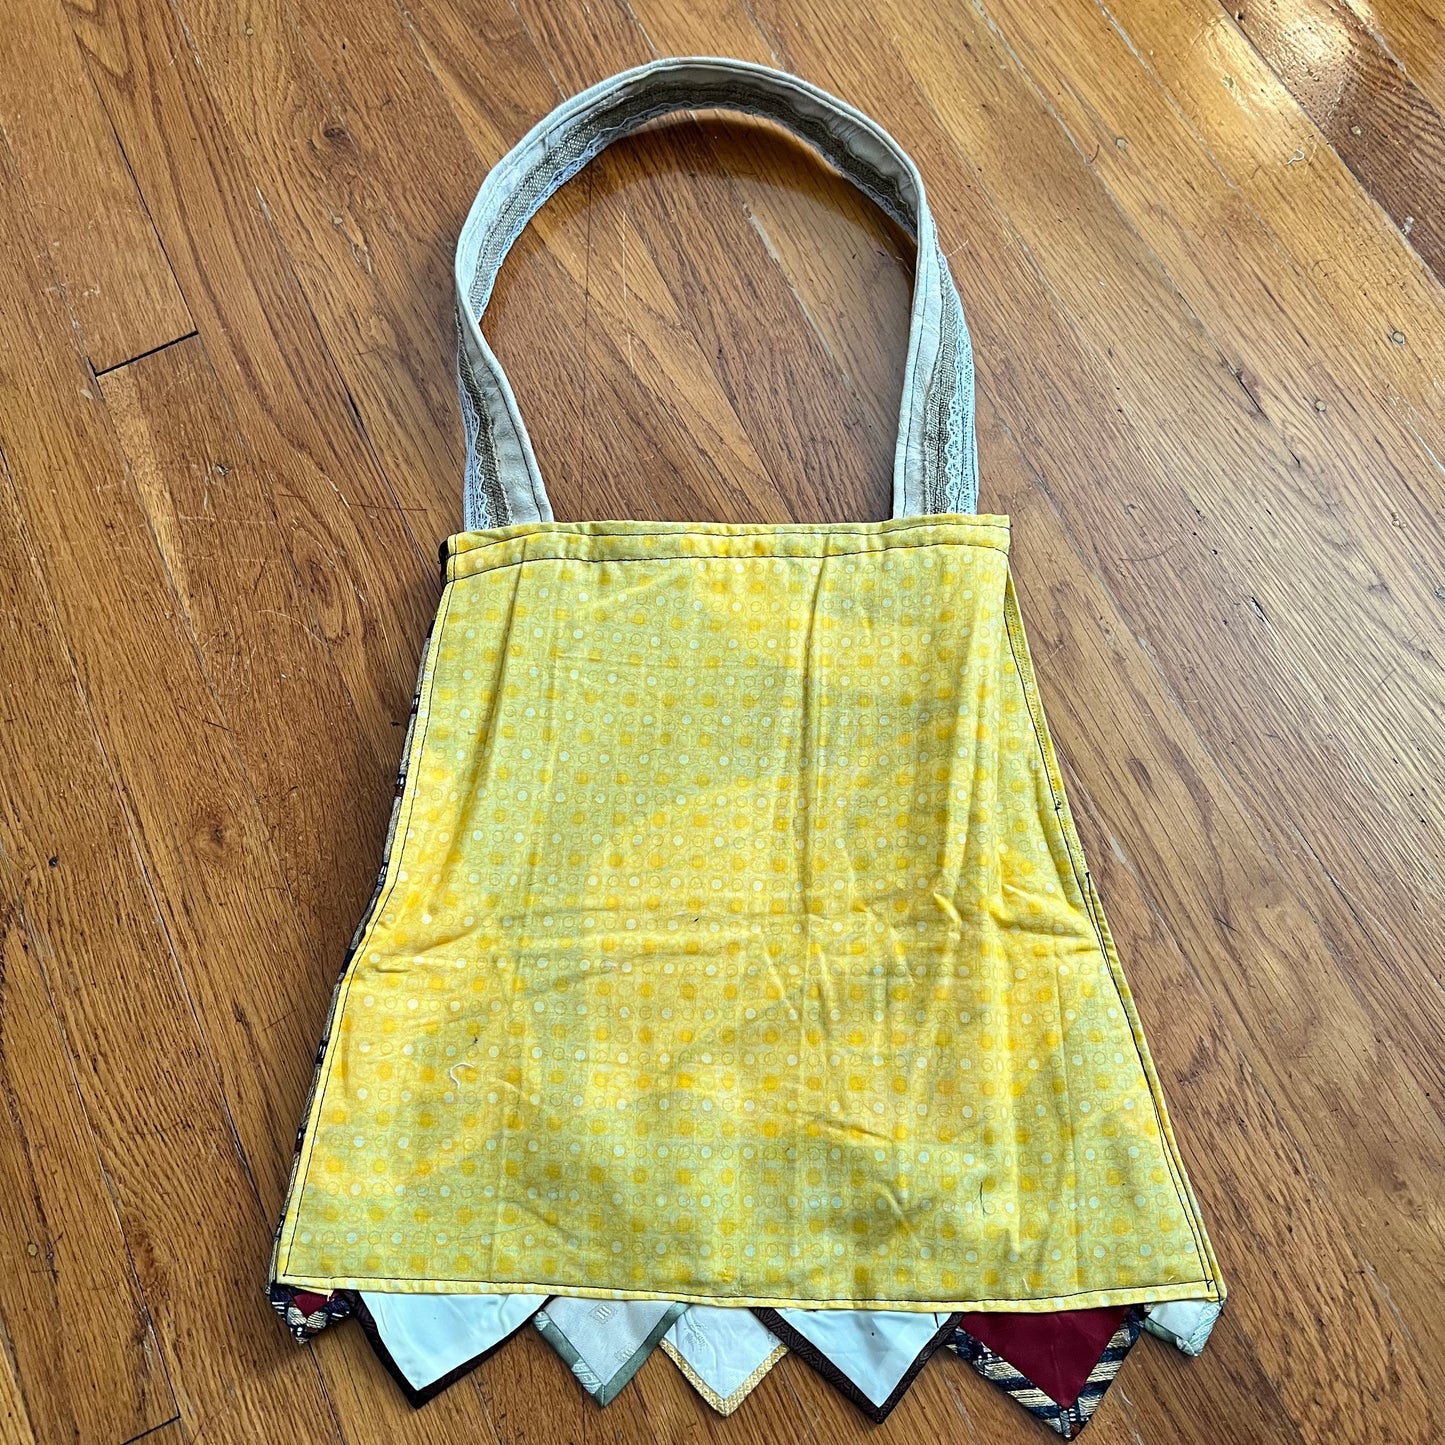 aerial back view of the teal tote bag, in a yellow dot material against a wood background